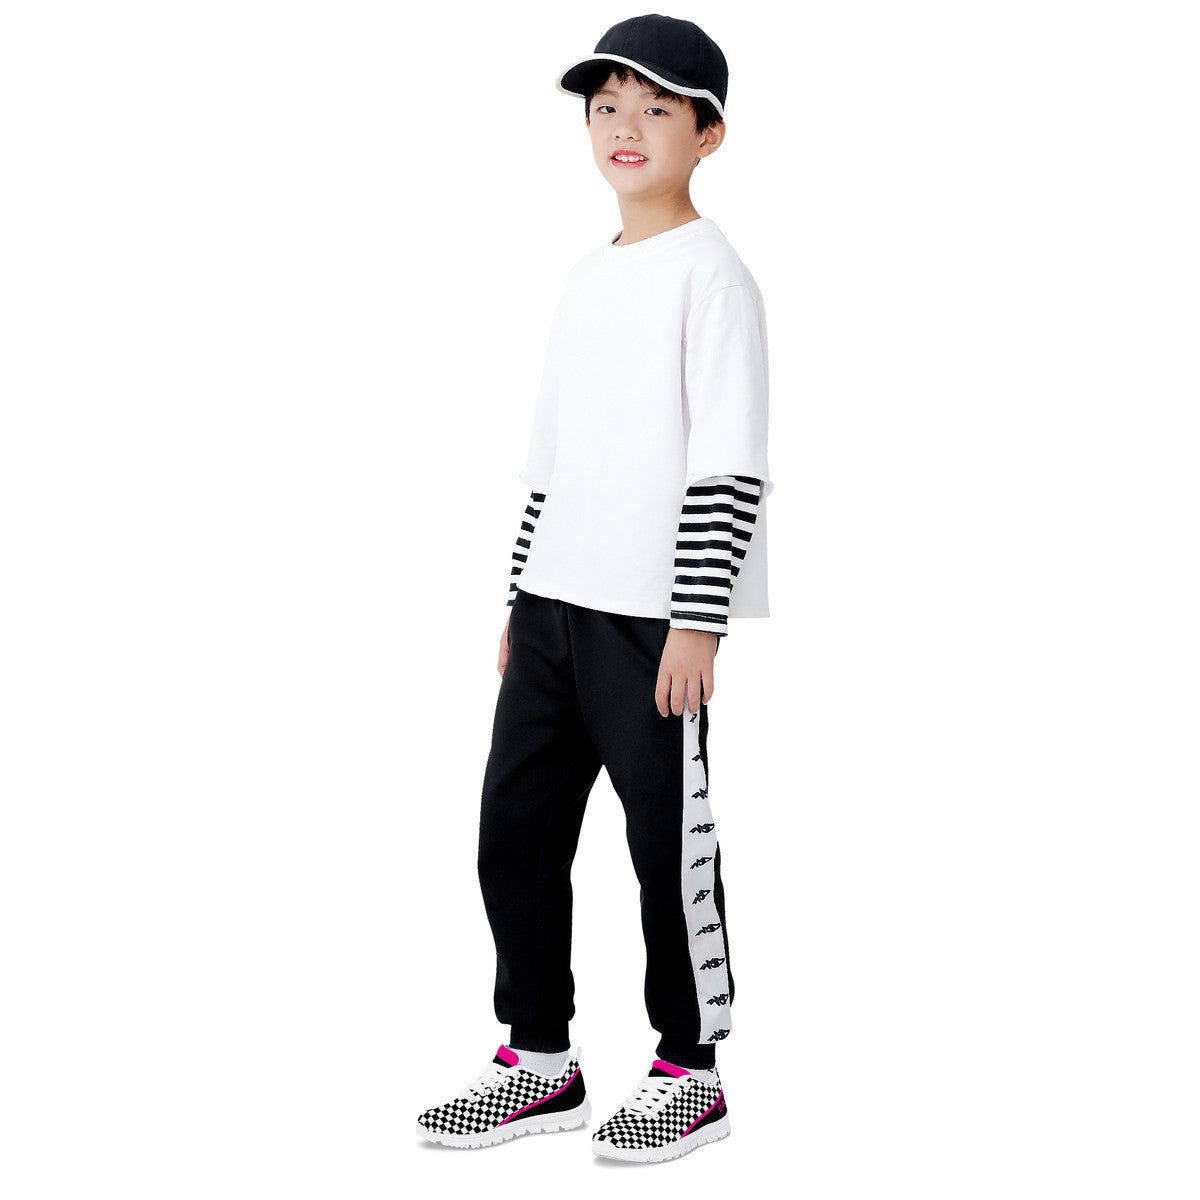 Kids Dance Sneakers - Checkered Black - White - Pink